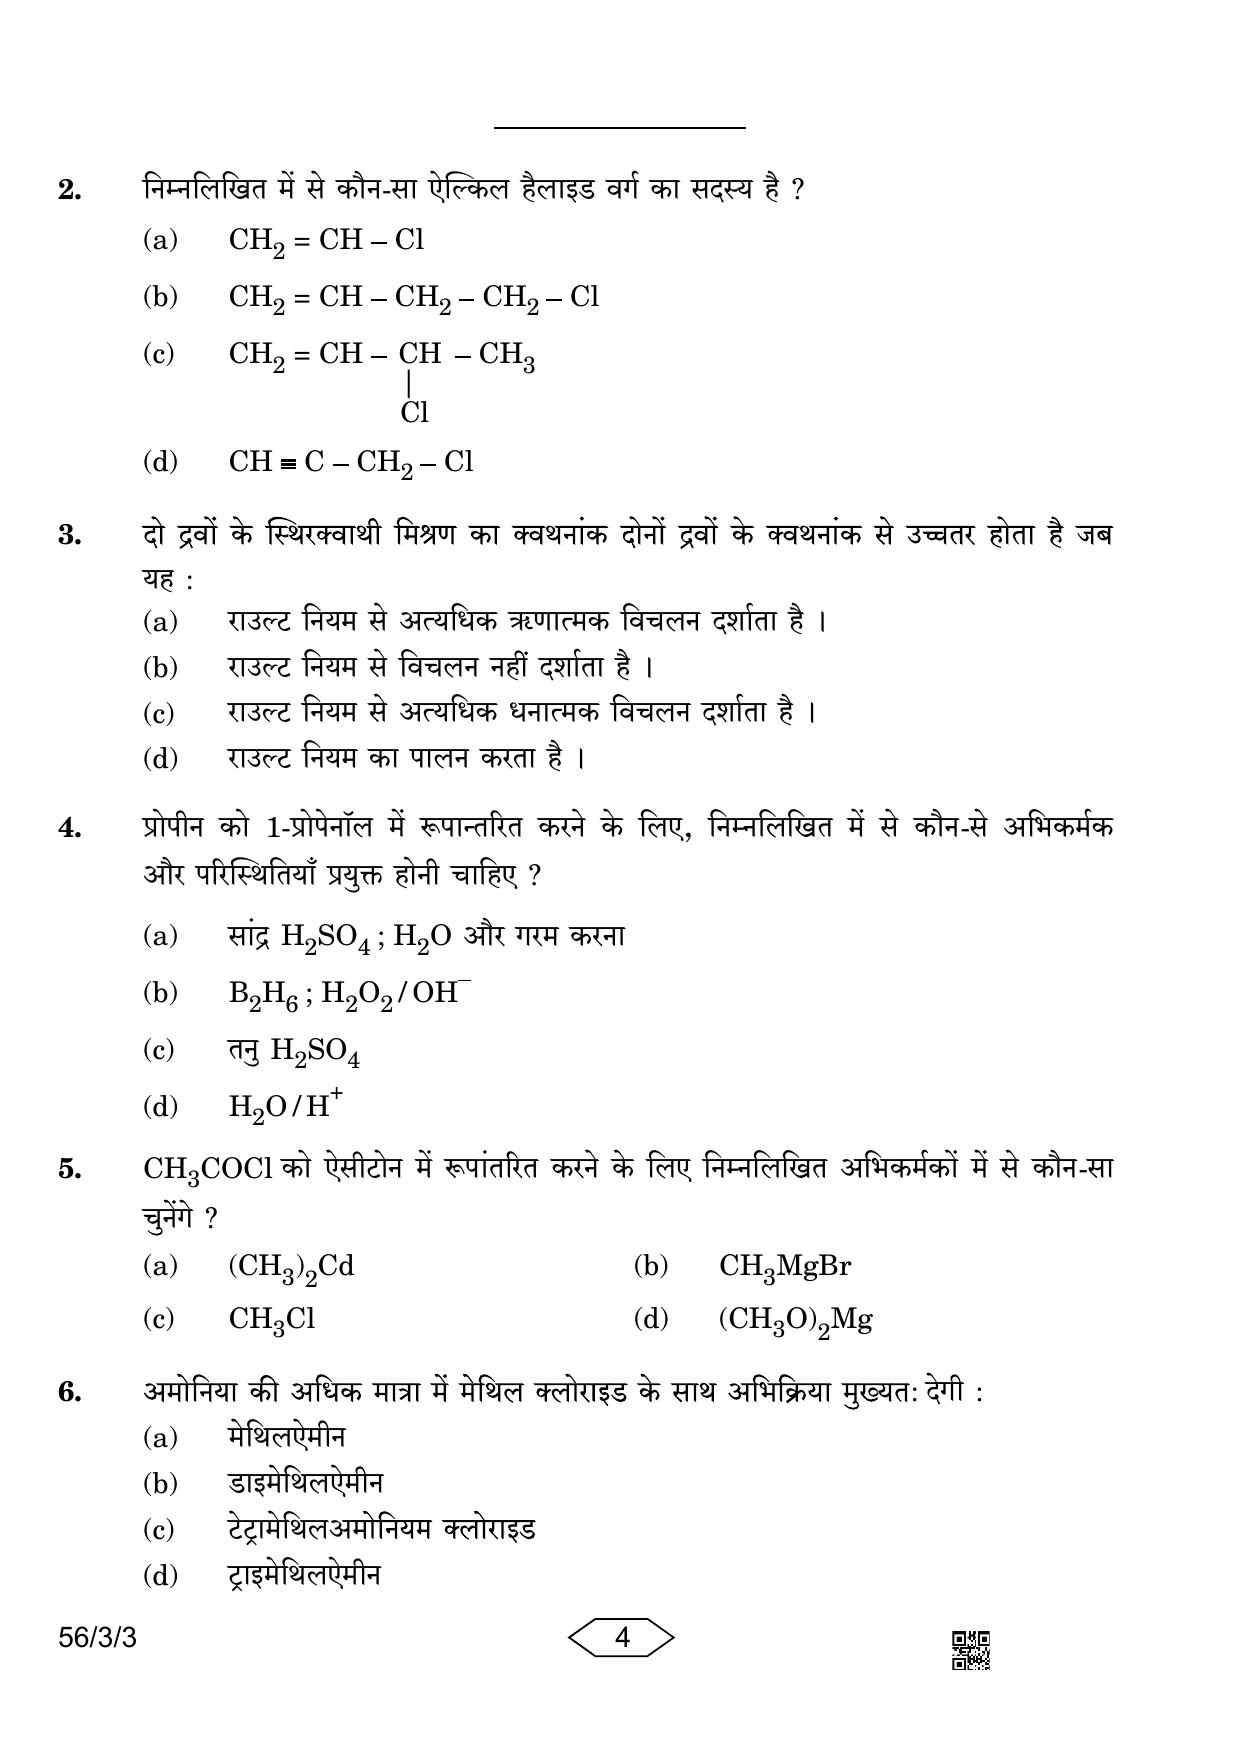 CBSE Class 12 56-3-3 Chemistry 2023 Question Paper - Page 4